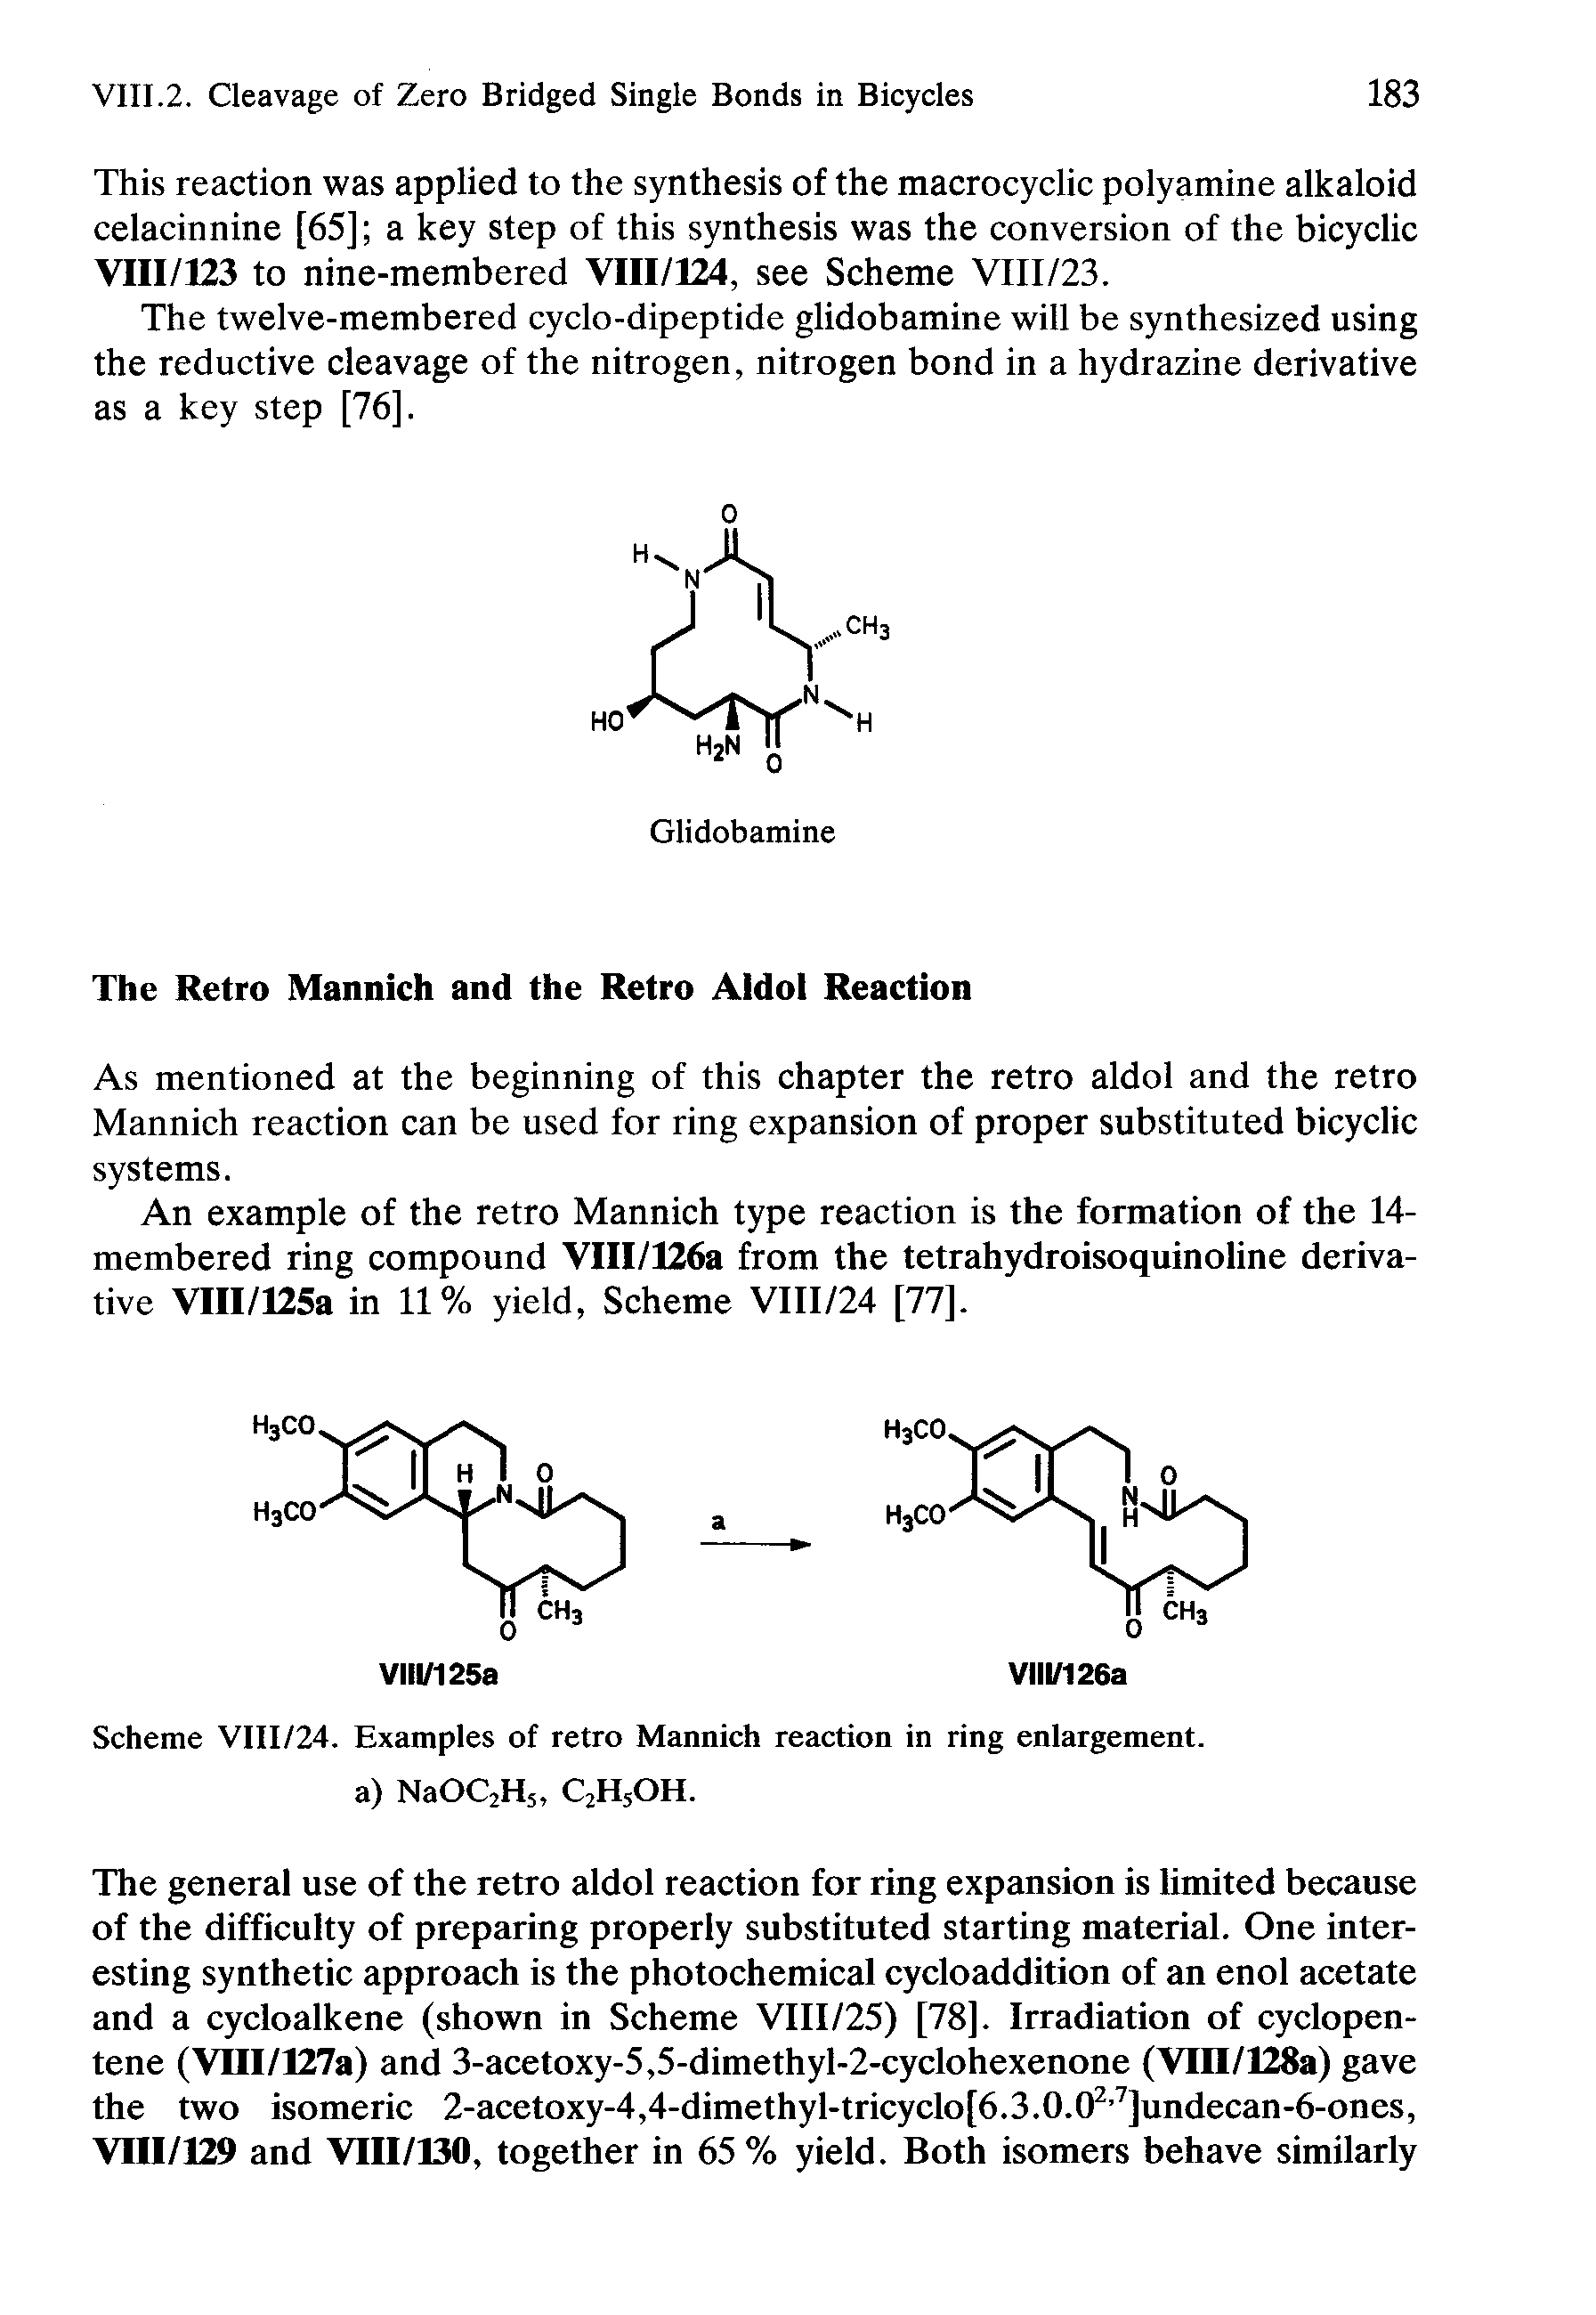 Scheme VIII/24. Examples of retro Mannich reaction in ring enlargement, a) NaOC2H5, C2H5OH.